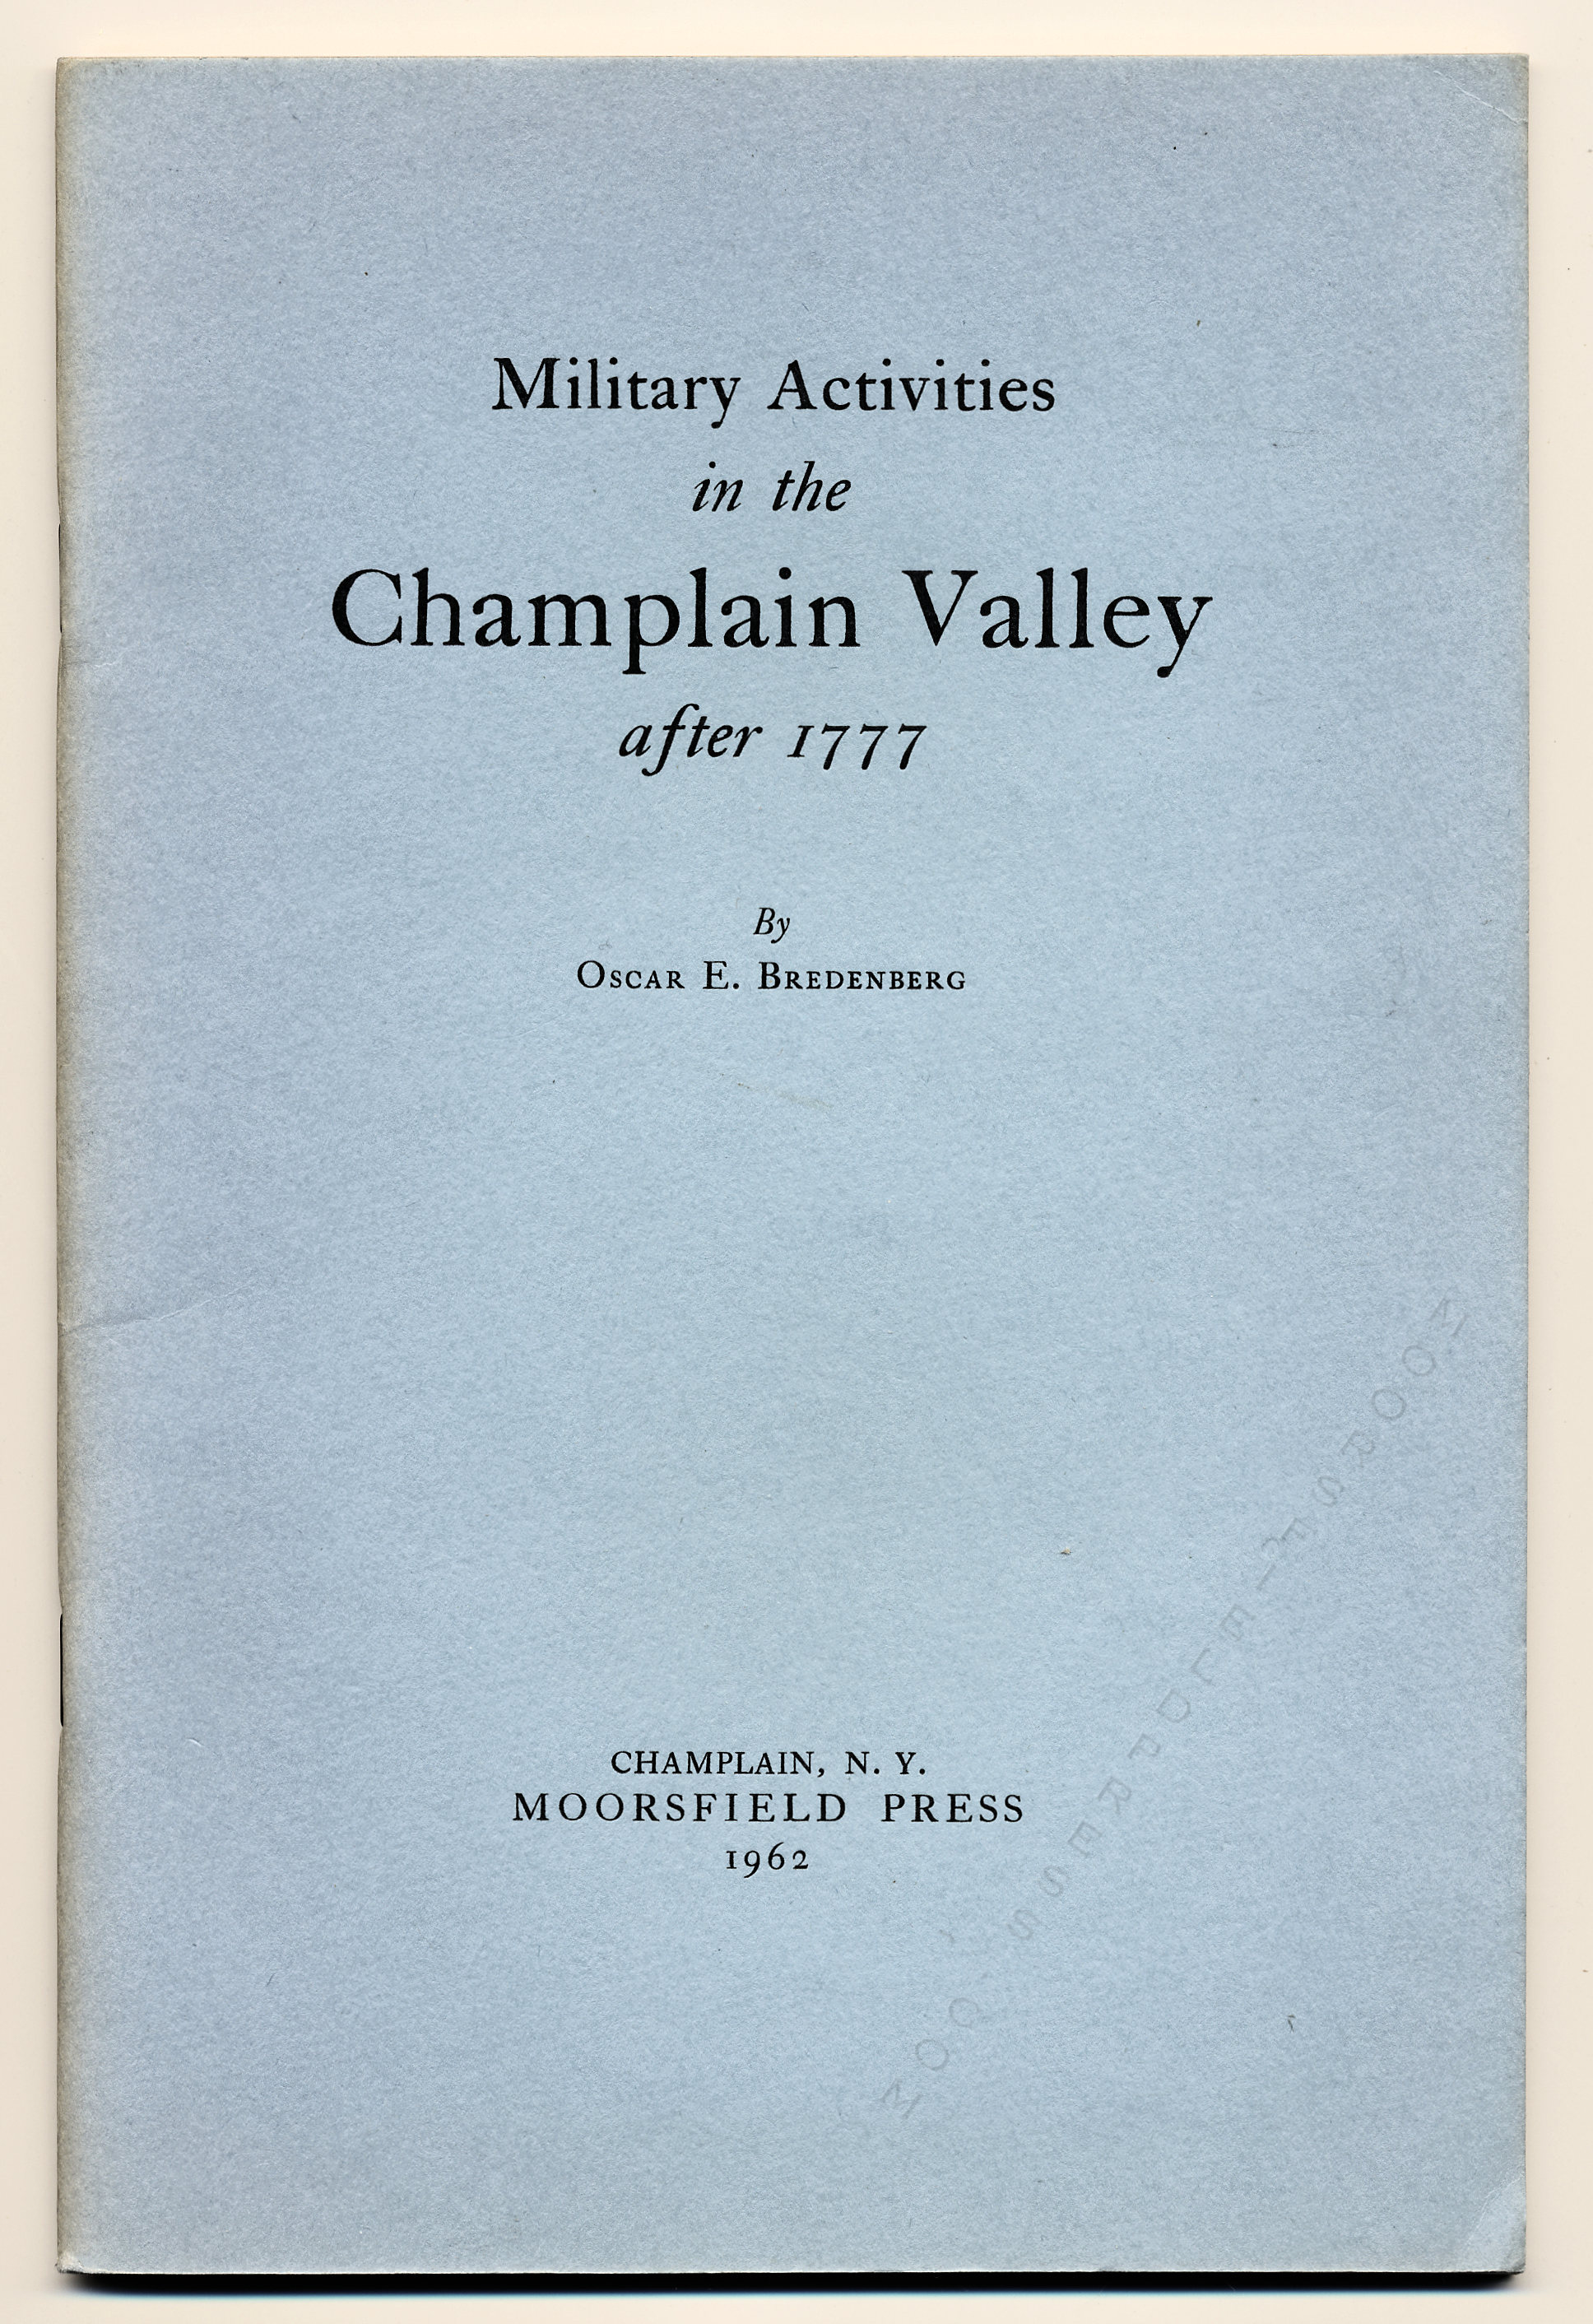 MILITARY
                      ACTIVITIES IN THE CHAMPLAIN VALLEY AFTER 1777 BY
                      OSCAR BREDENBERG